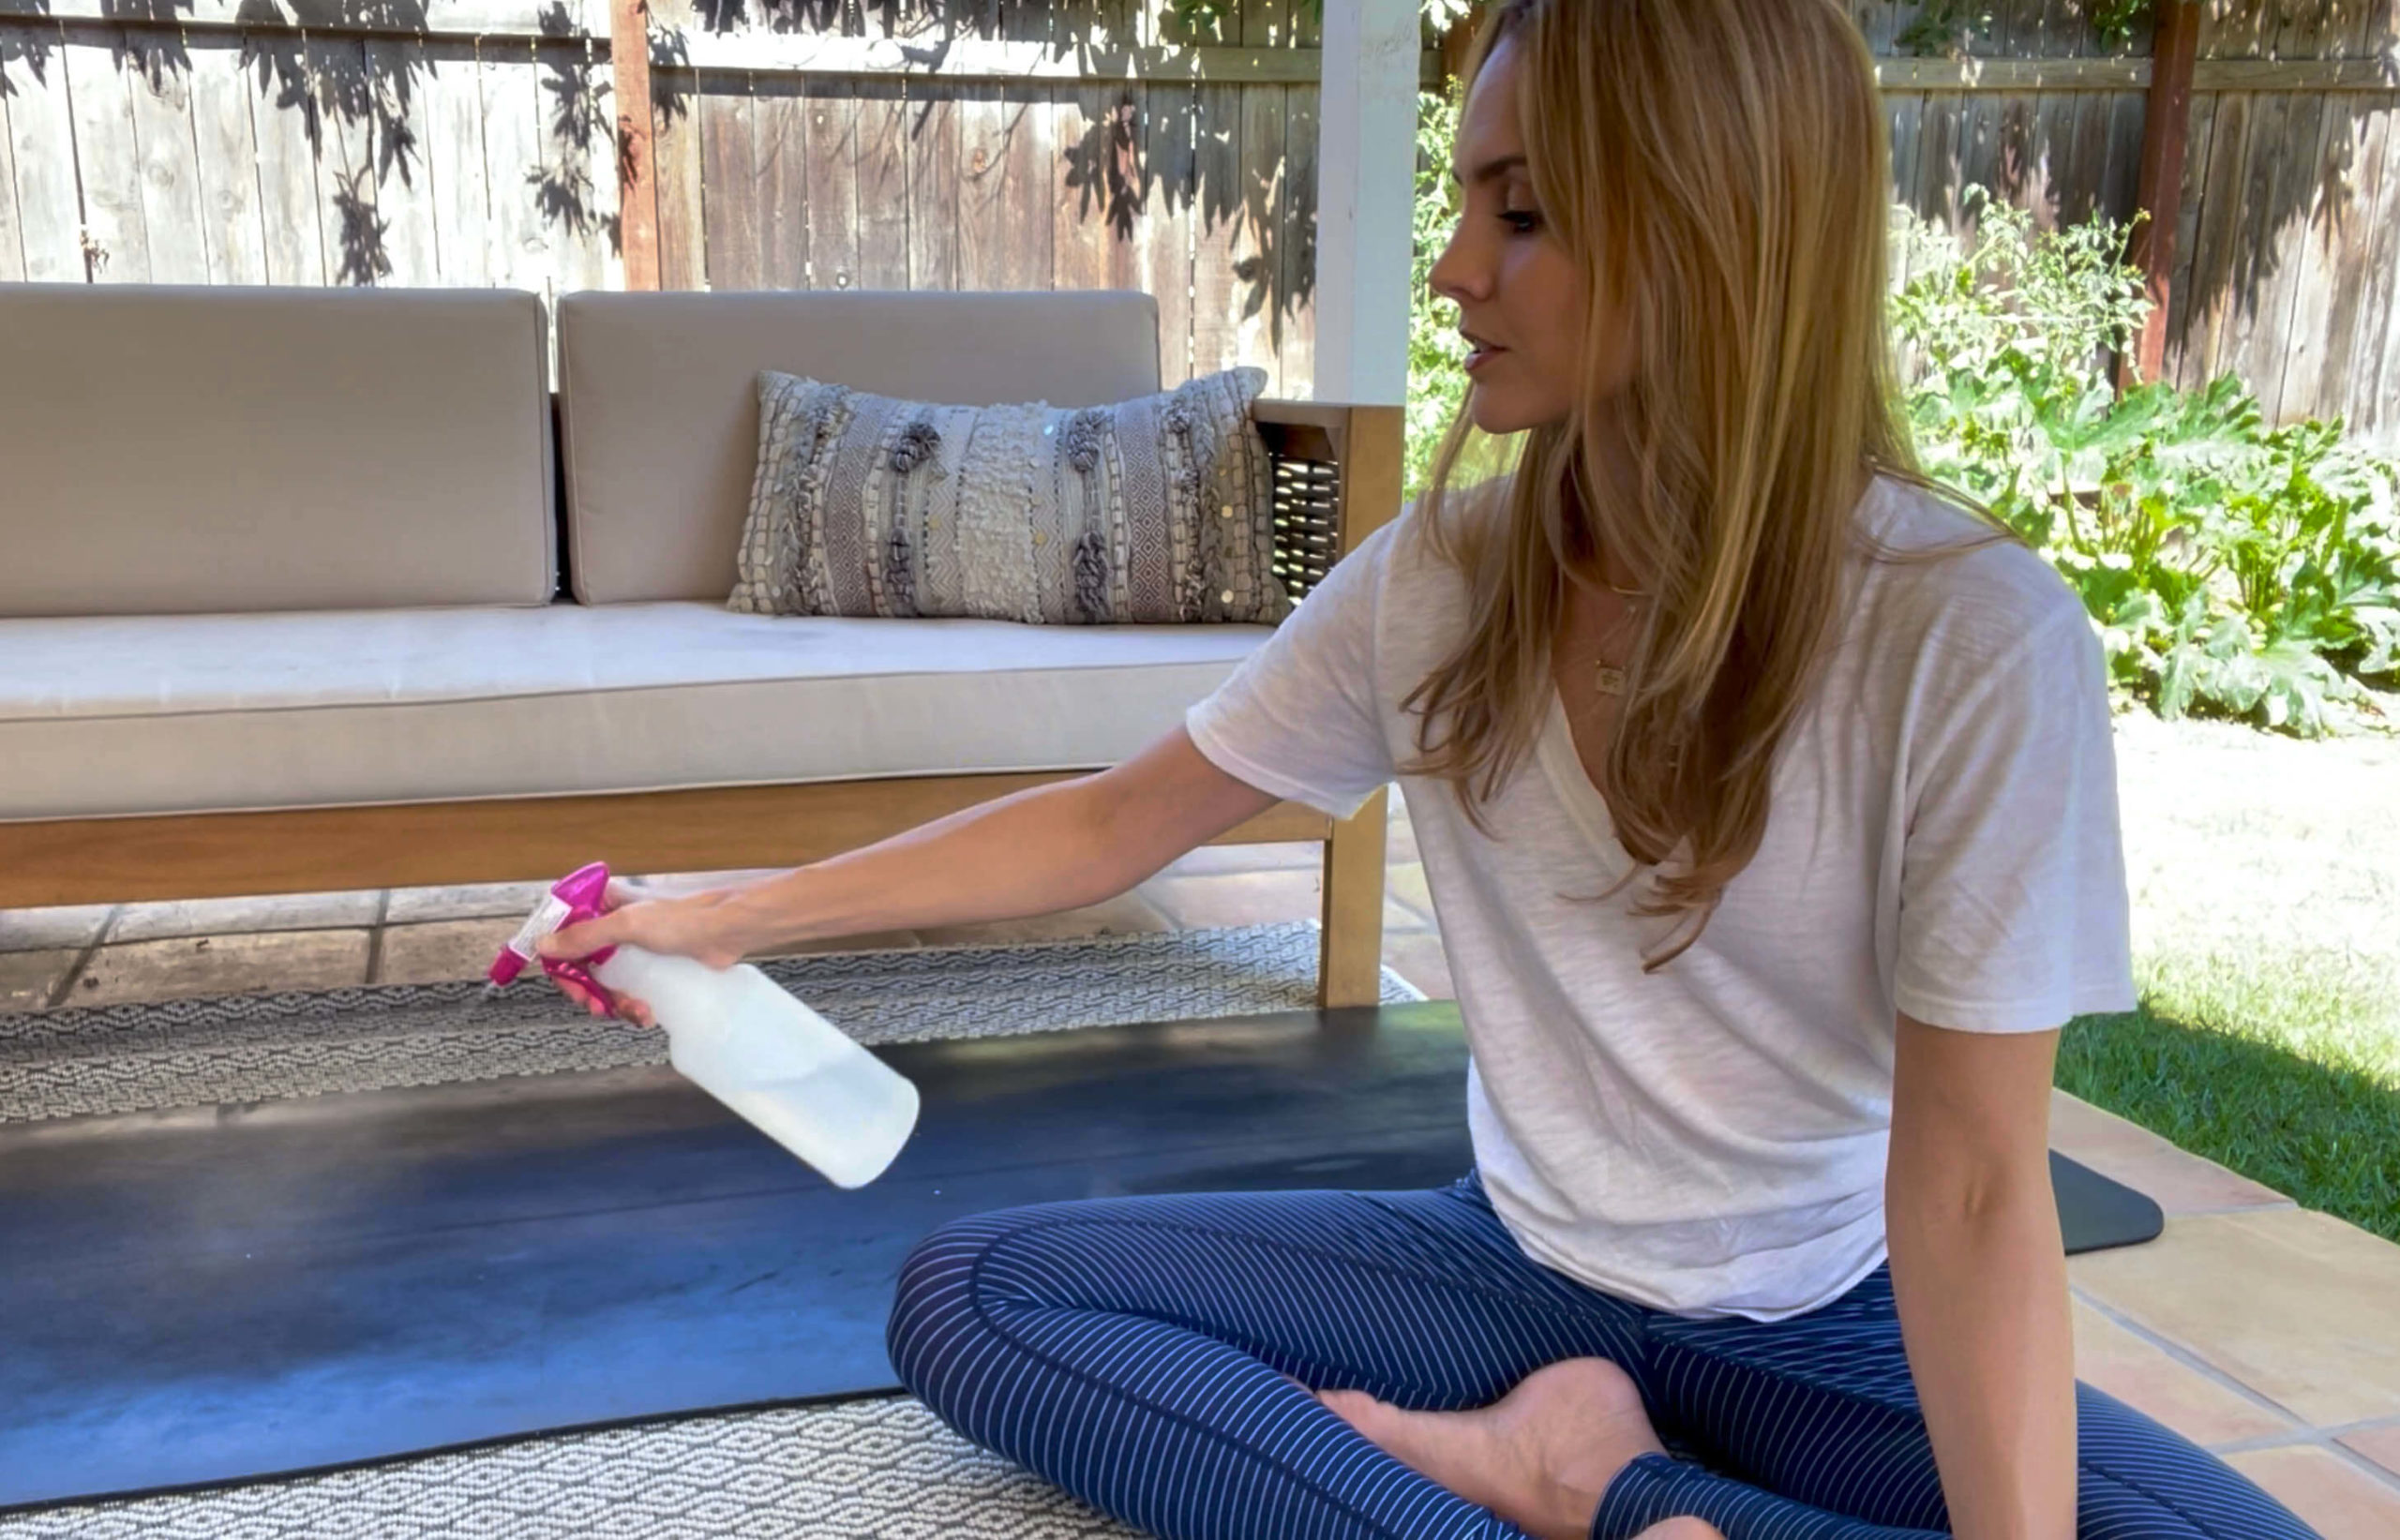 https://www.innerdimensiontv.com/wp-content/uploads/2021/09/how-to-clean-a-yoga-mat-the-right-way-1-scaled.jpeg